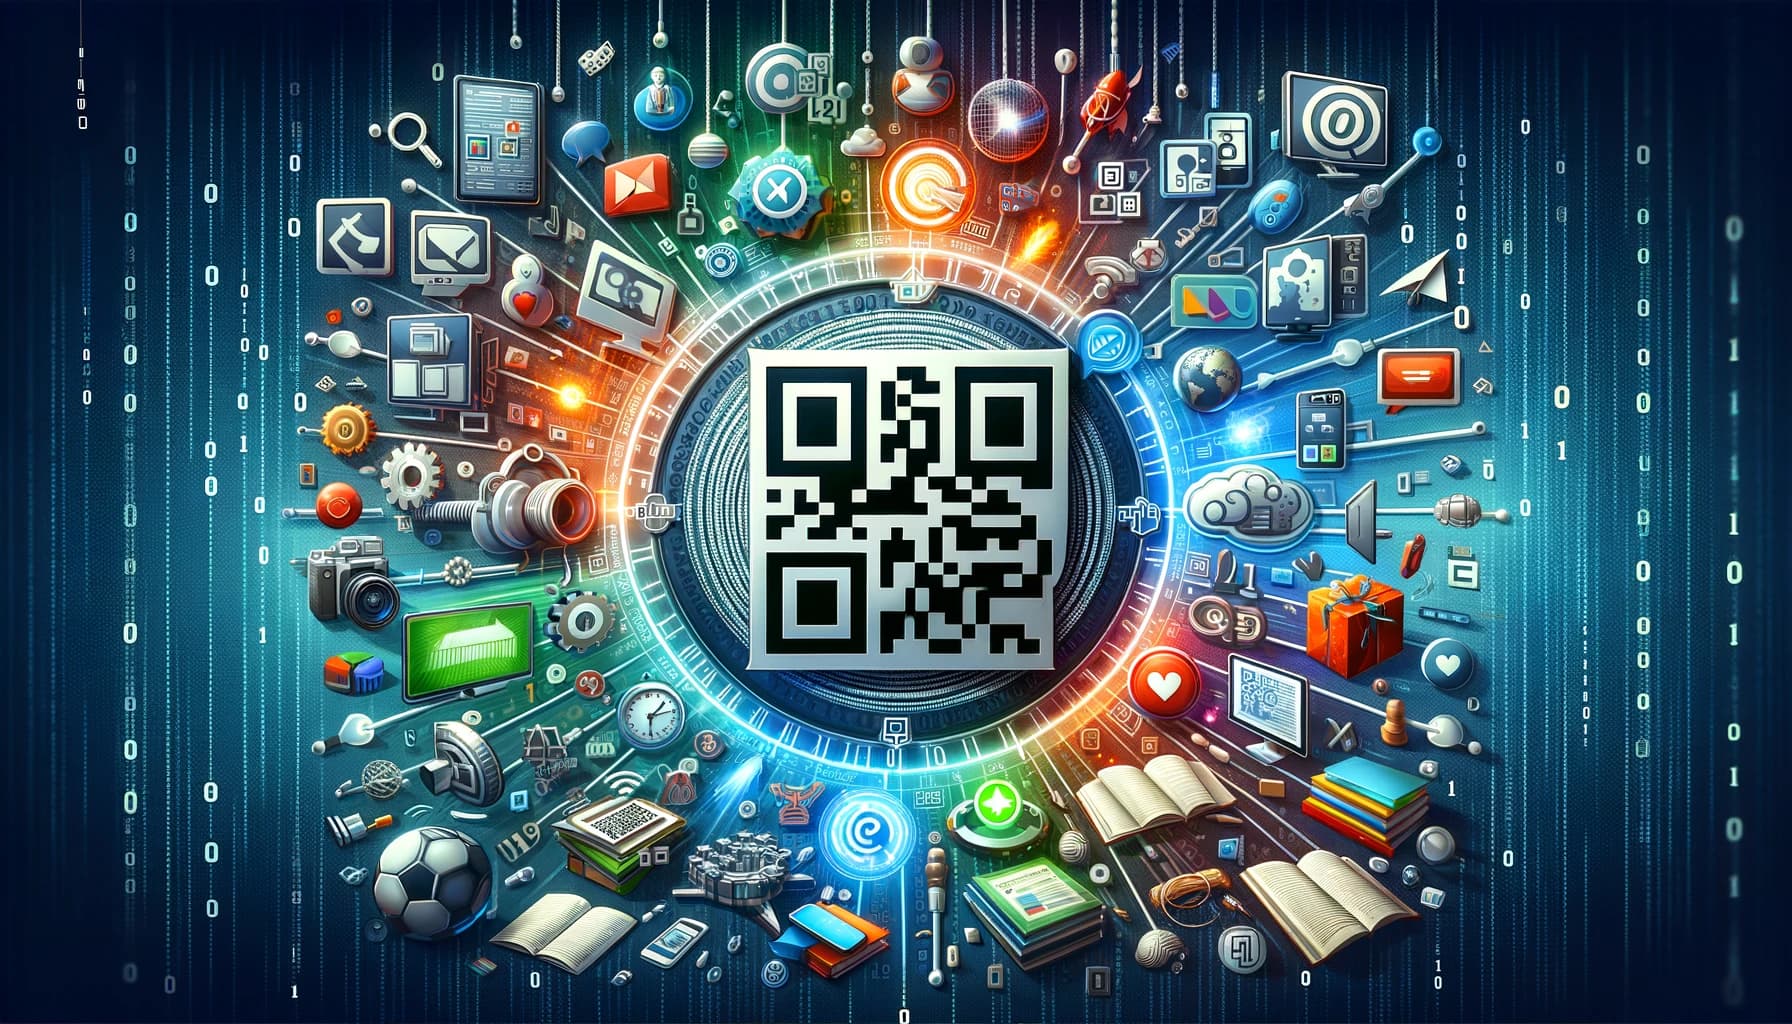 A conceptual image of a QR code surrounded by various digital and media icons, representing the convergence of technology and information in a digital ecosystem.